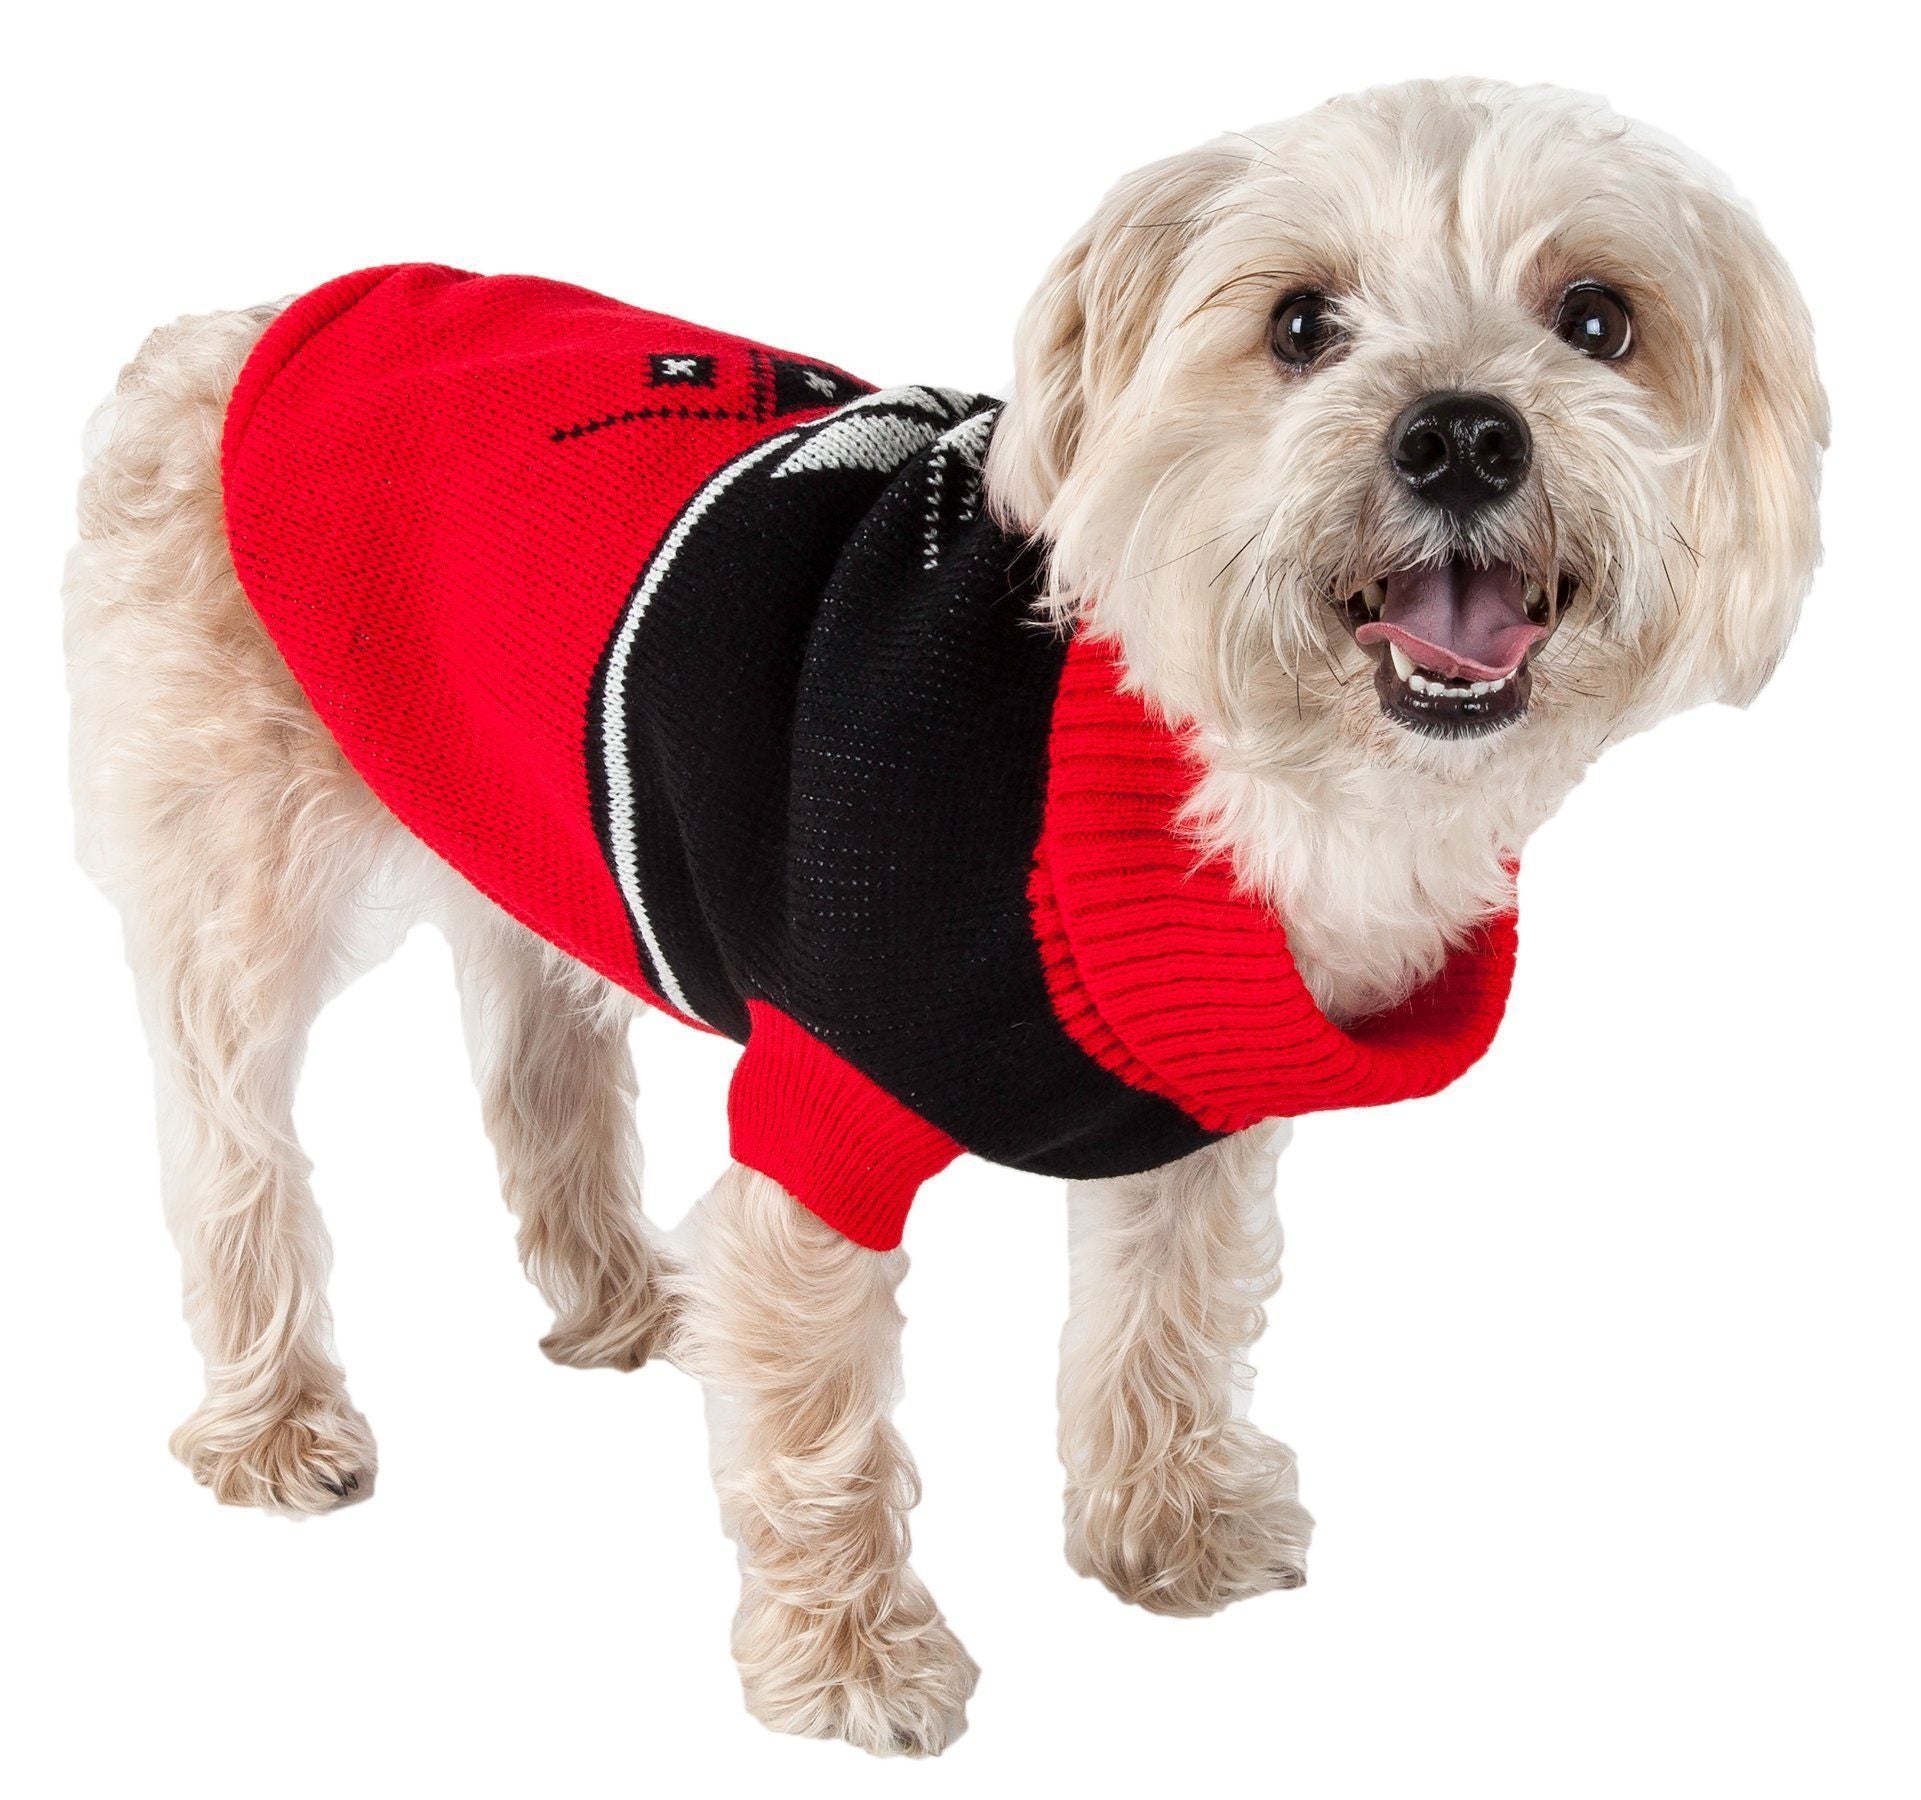 Pet Life ® Snow Flake Cable-Knitted Ribbed Fashion Turtle Neck Dog Sweater X-Small Red And Black